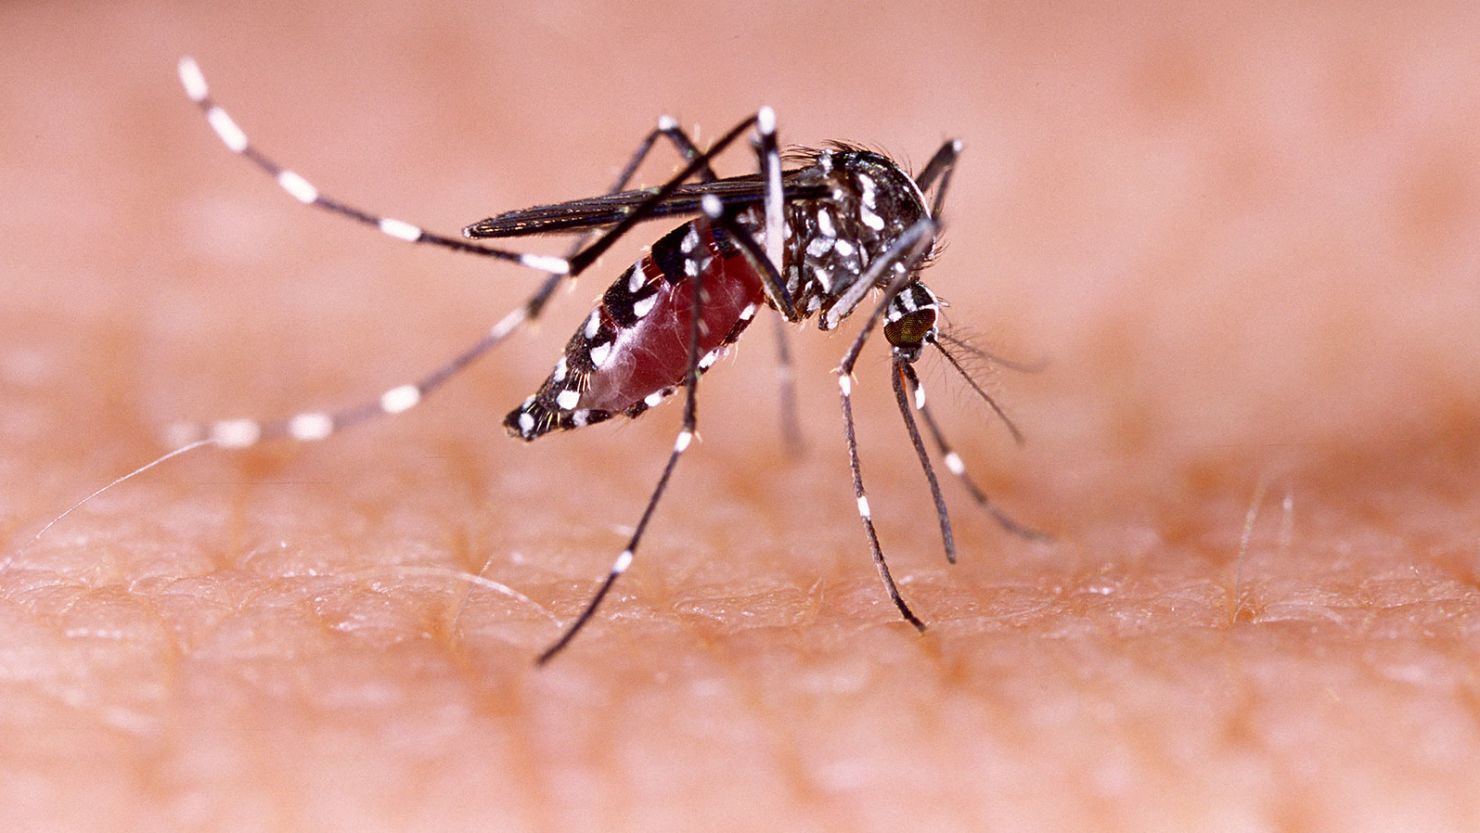 An aedes aegypti mosquito, which has been known to carry Dengue, as well as Zika and other diseases.